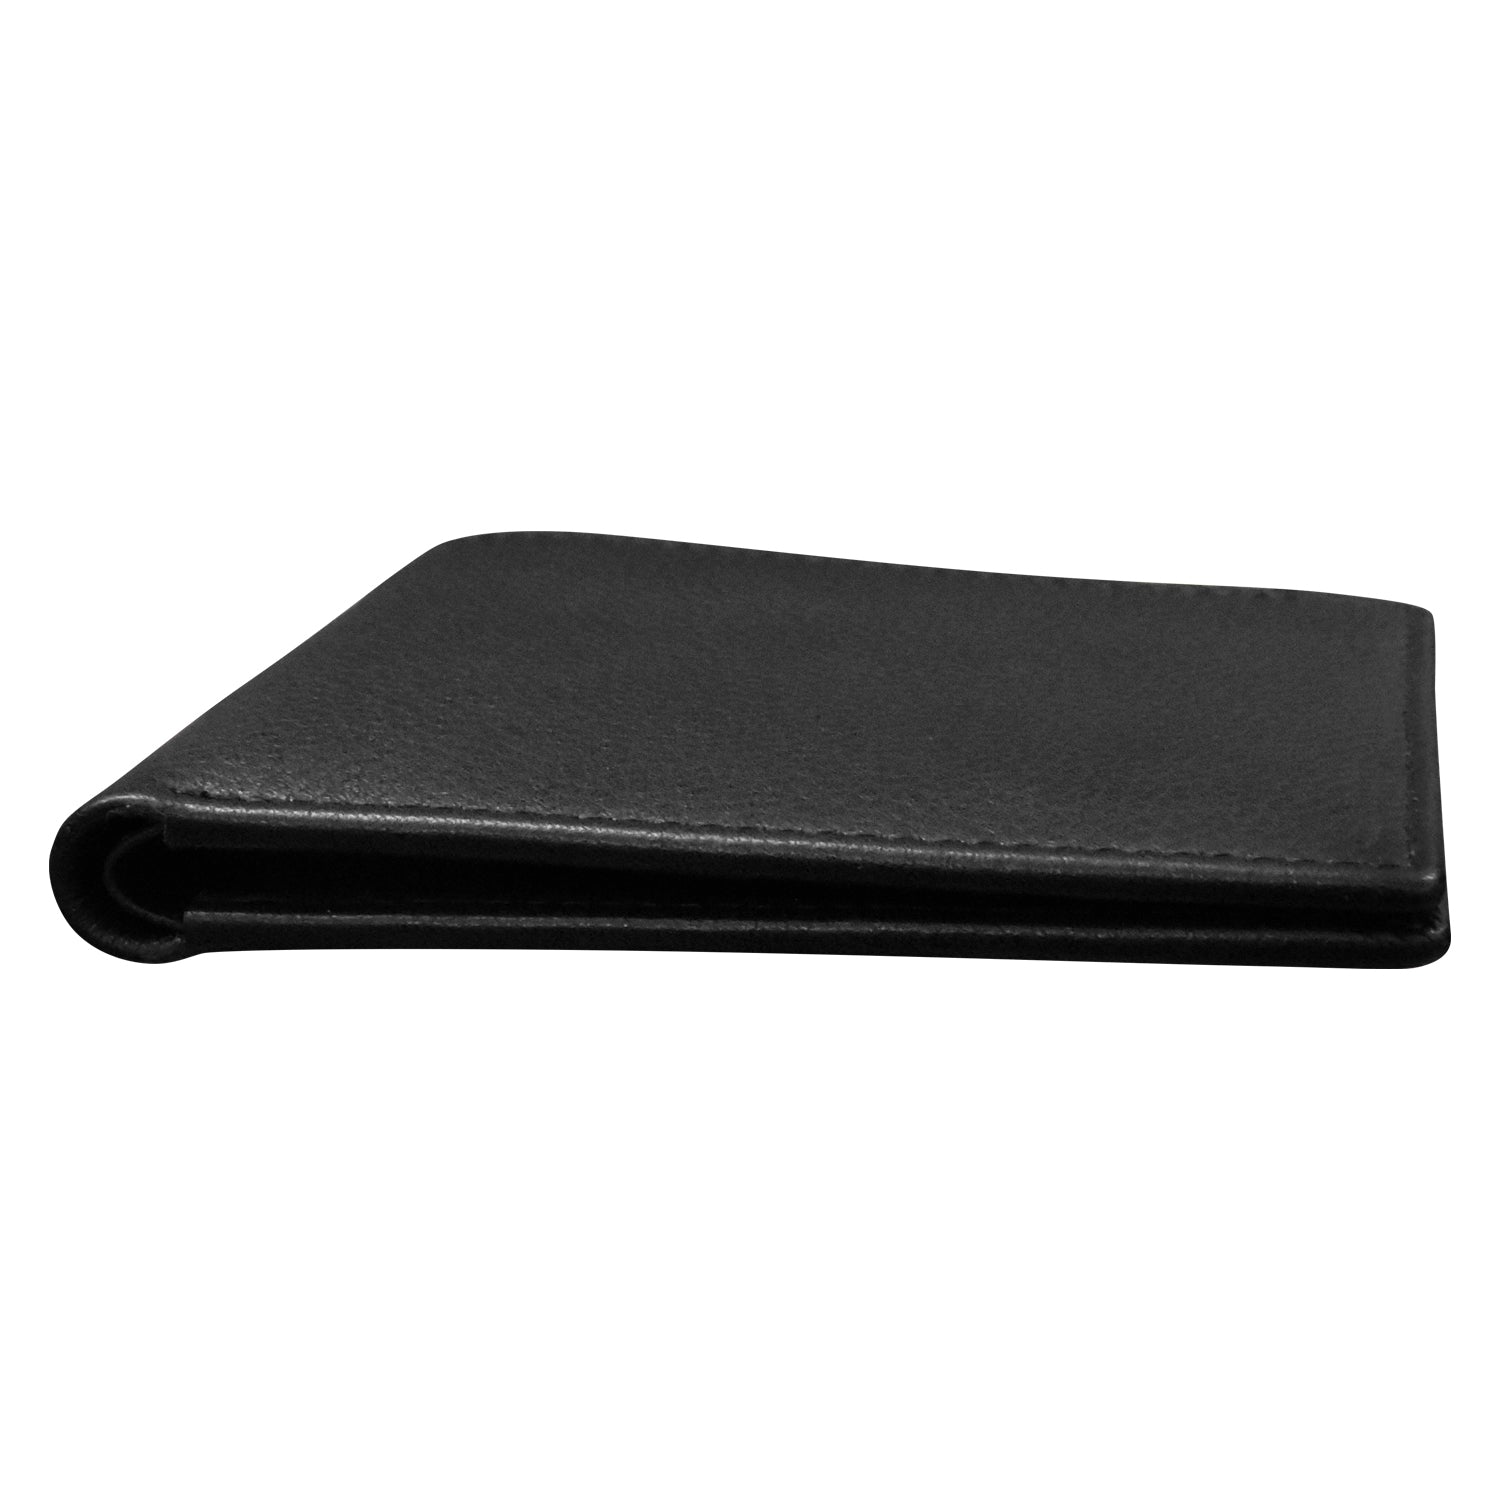 Off-White Leather for Money Bifold Wallet - Black - One Size